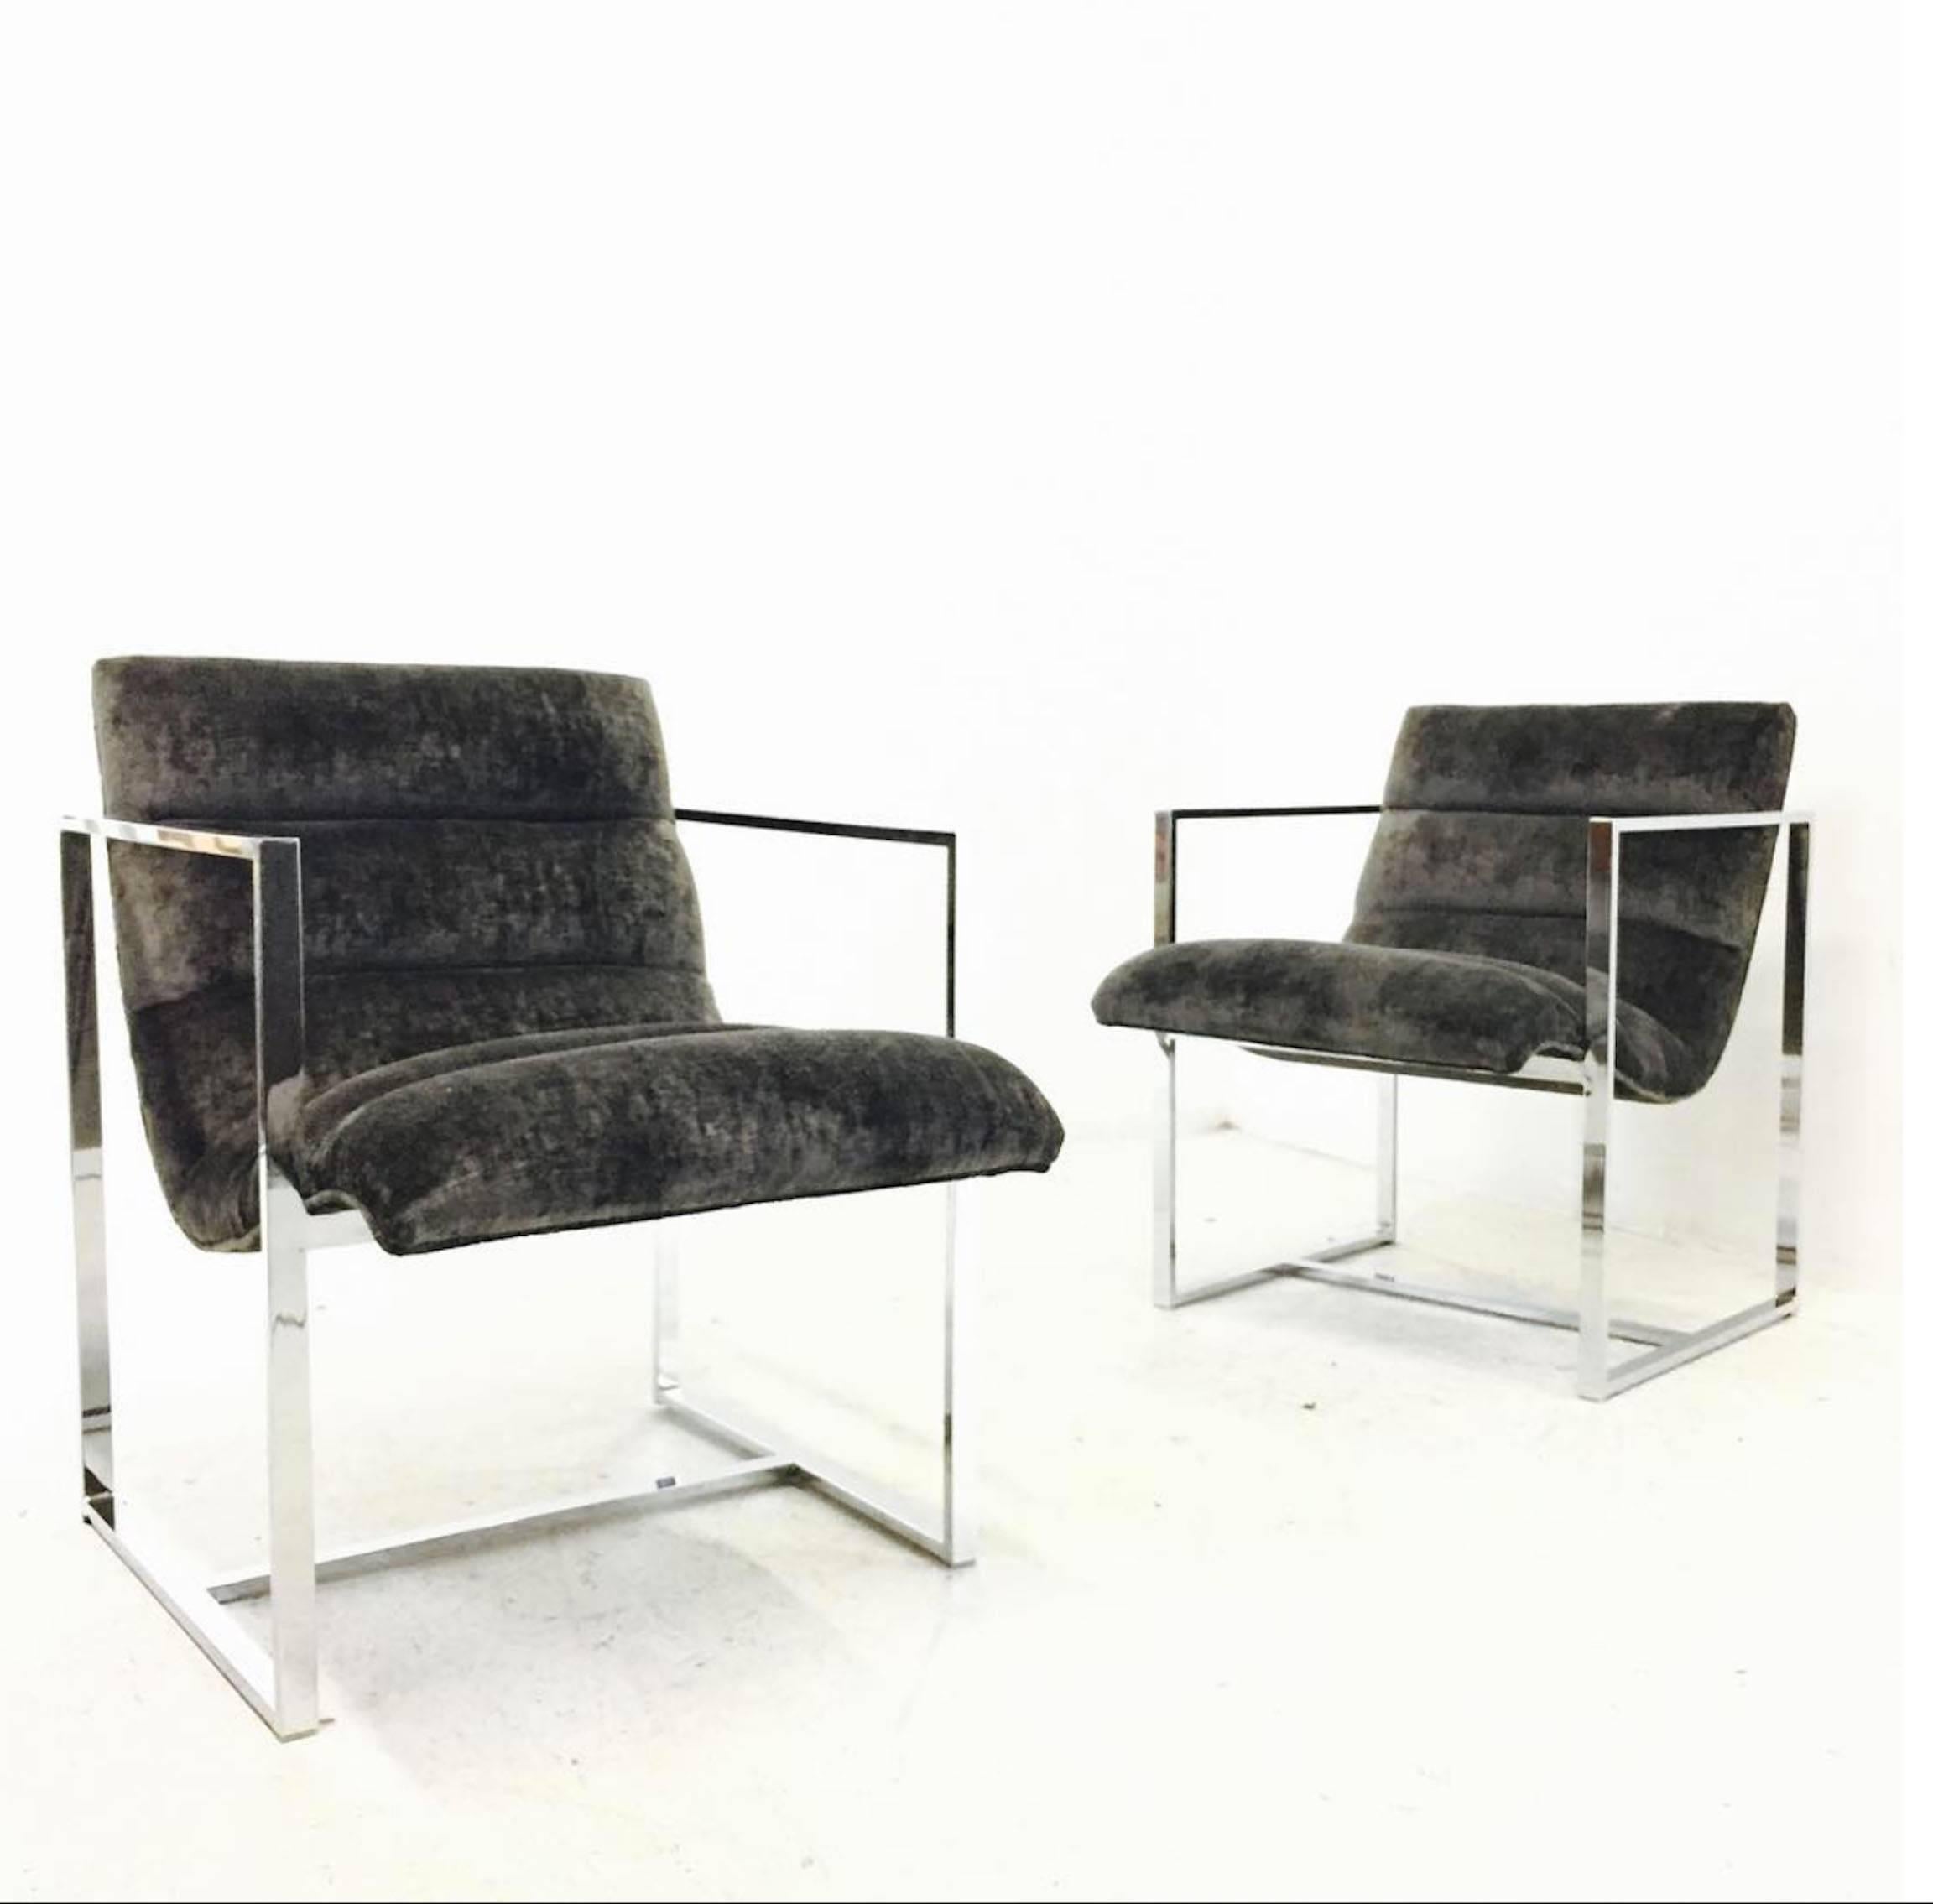 Pair of Milo Baughman chrome cube scoop chairs. Newly upholstered in dark gray velvet.

Dimension: 22" W x 26" D x 28" T,
seat height 18".